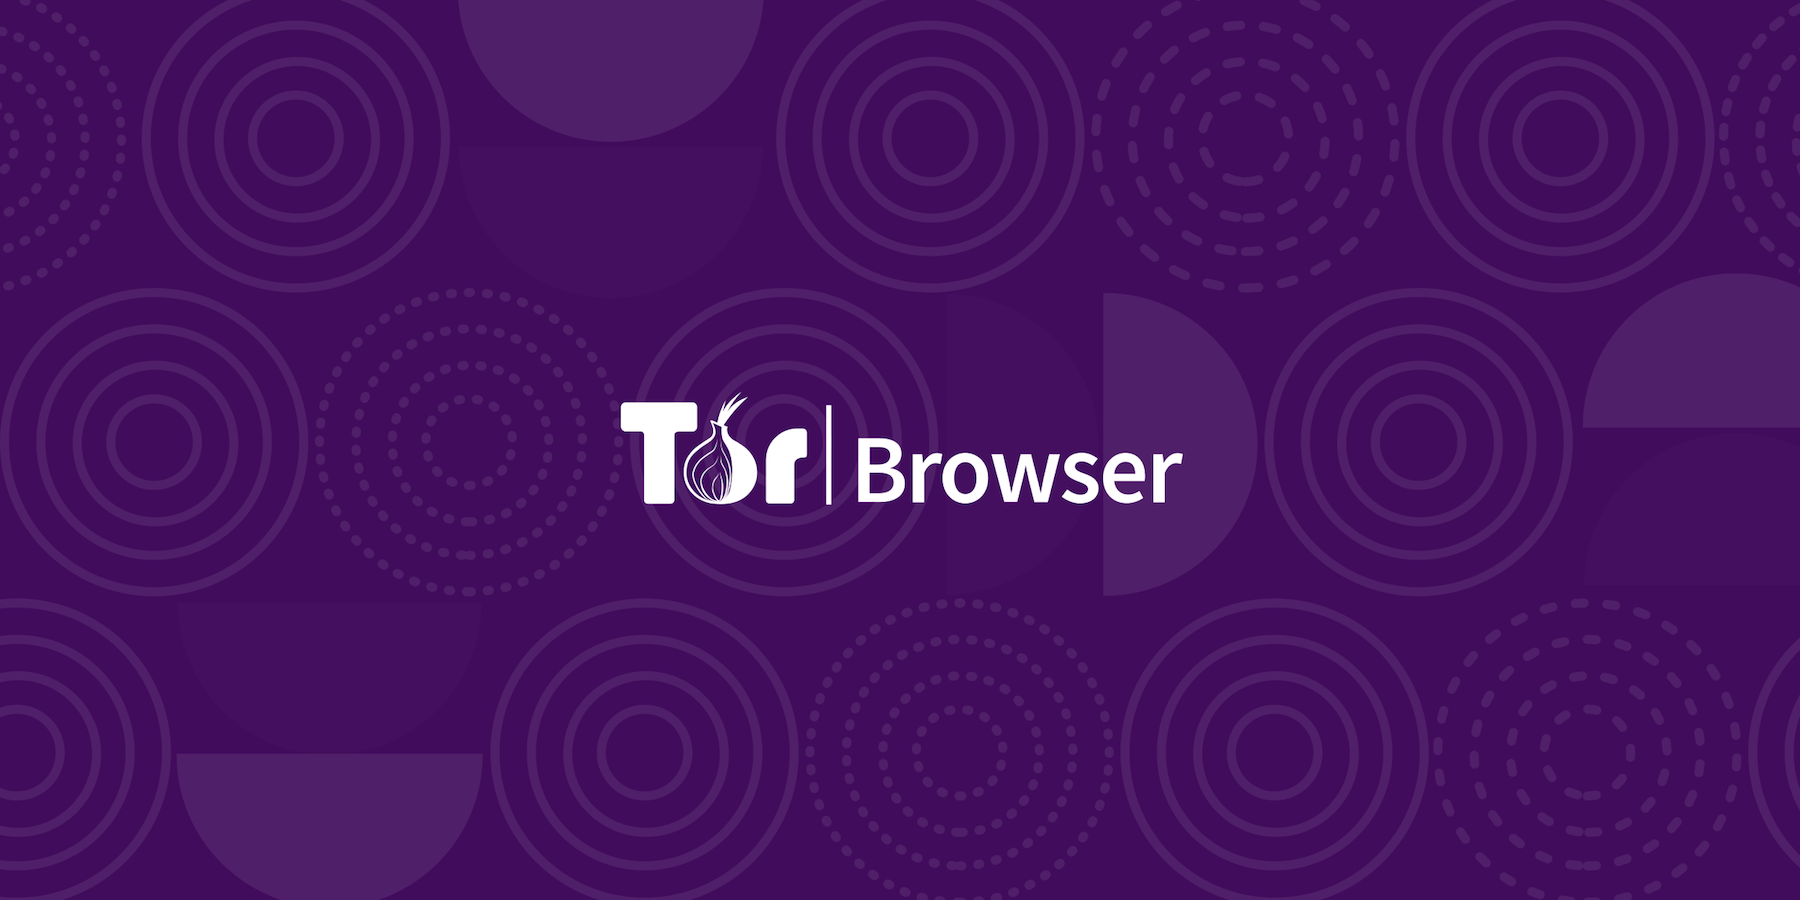 Is there a mobile tor browser hidra детское порно на tor browser hydra